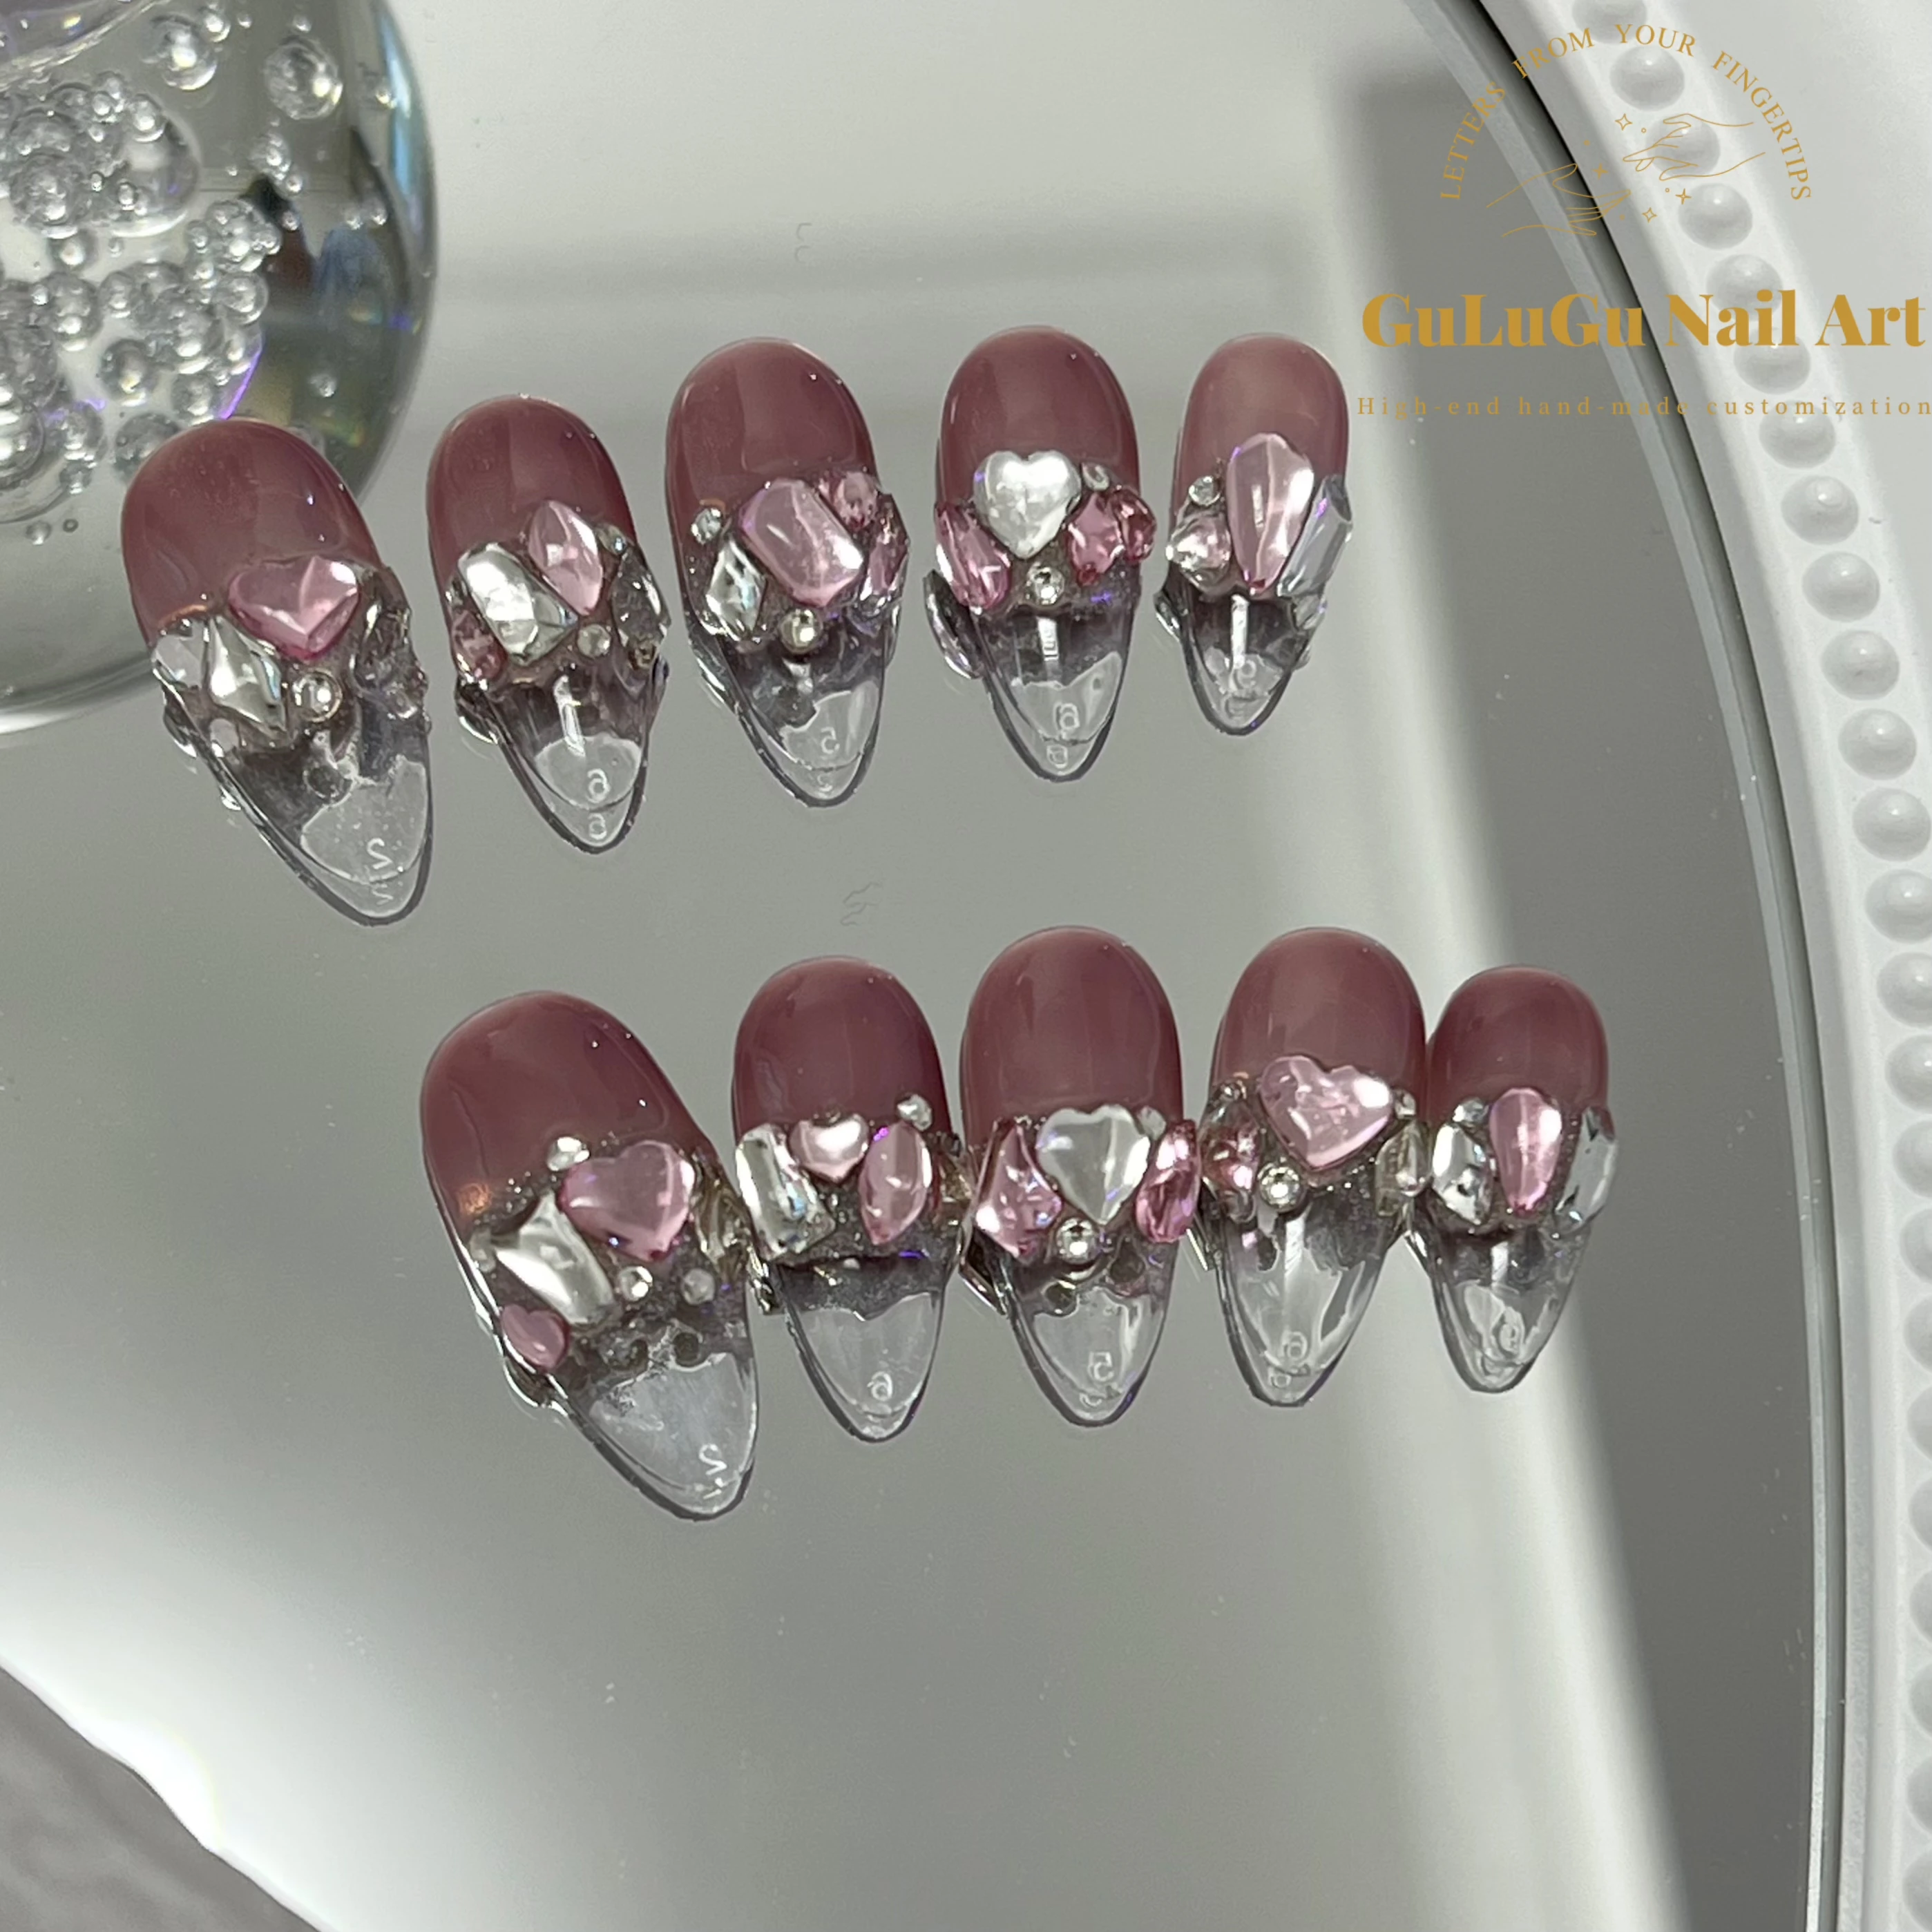 New high-end handmade unique design custom translucent French pink love diamond temperament female removable fake nail